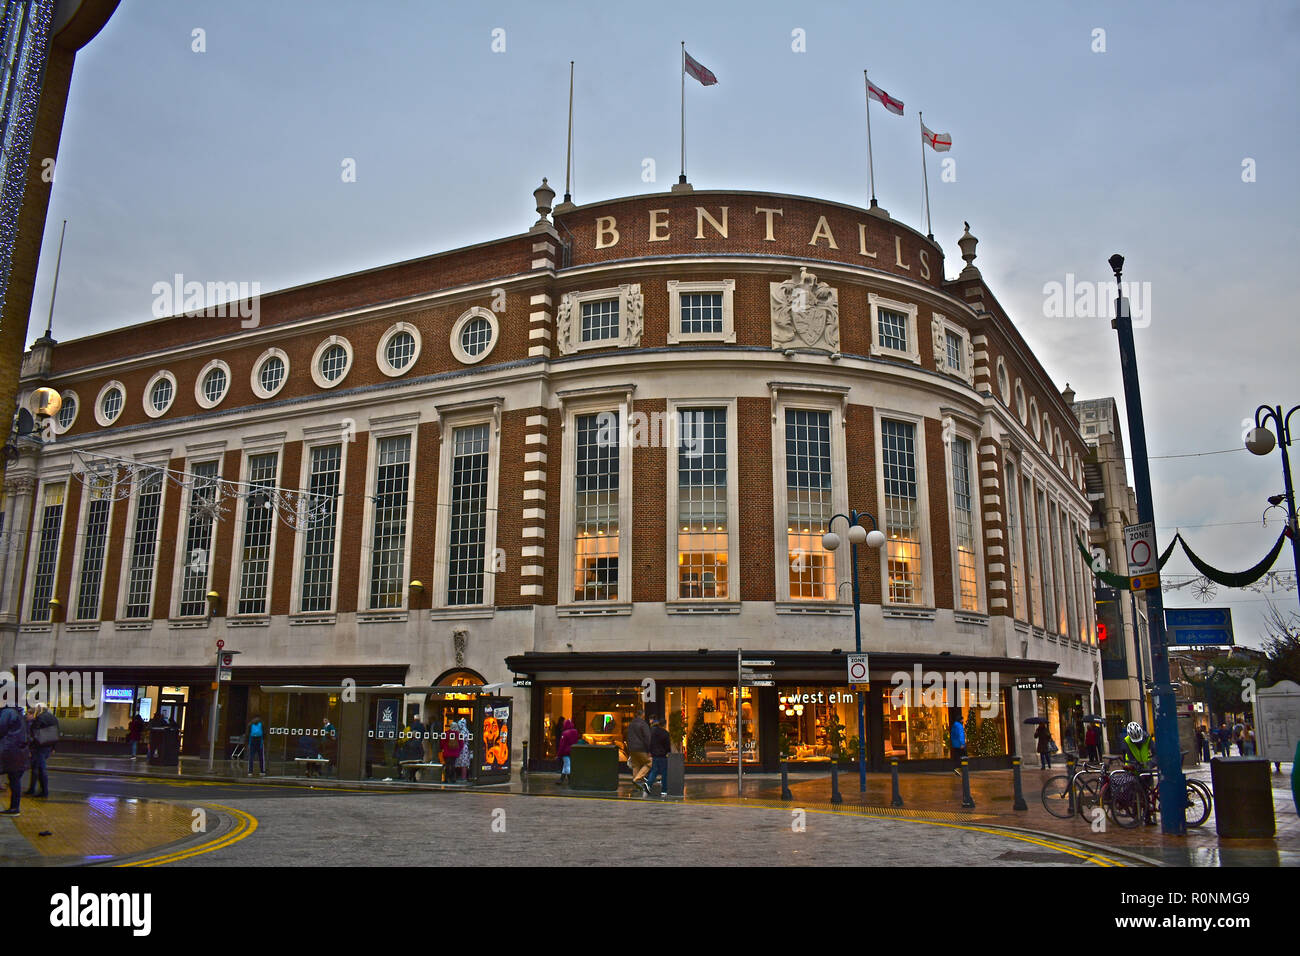 The famous Bentalls Department Store in the centre Kingston upon Thames, London,England. This iconic building is Grade II Listed. Stock Photo